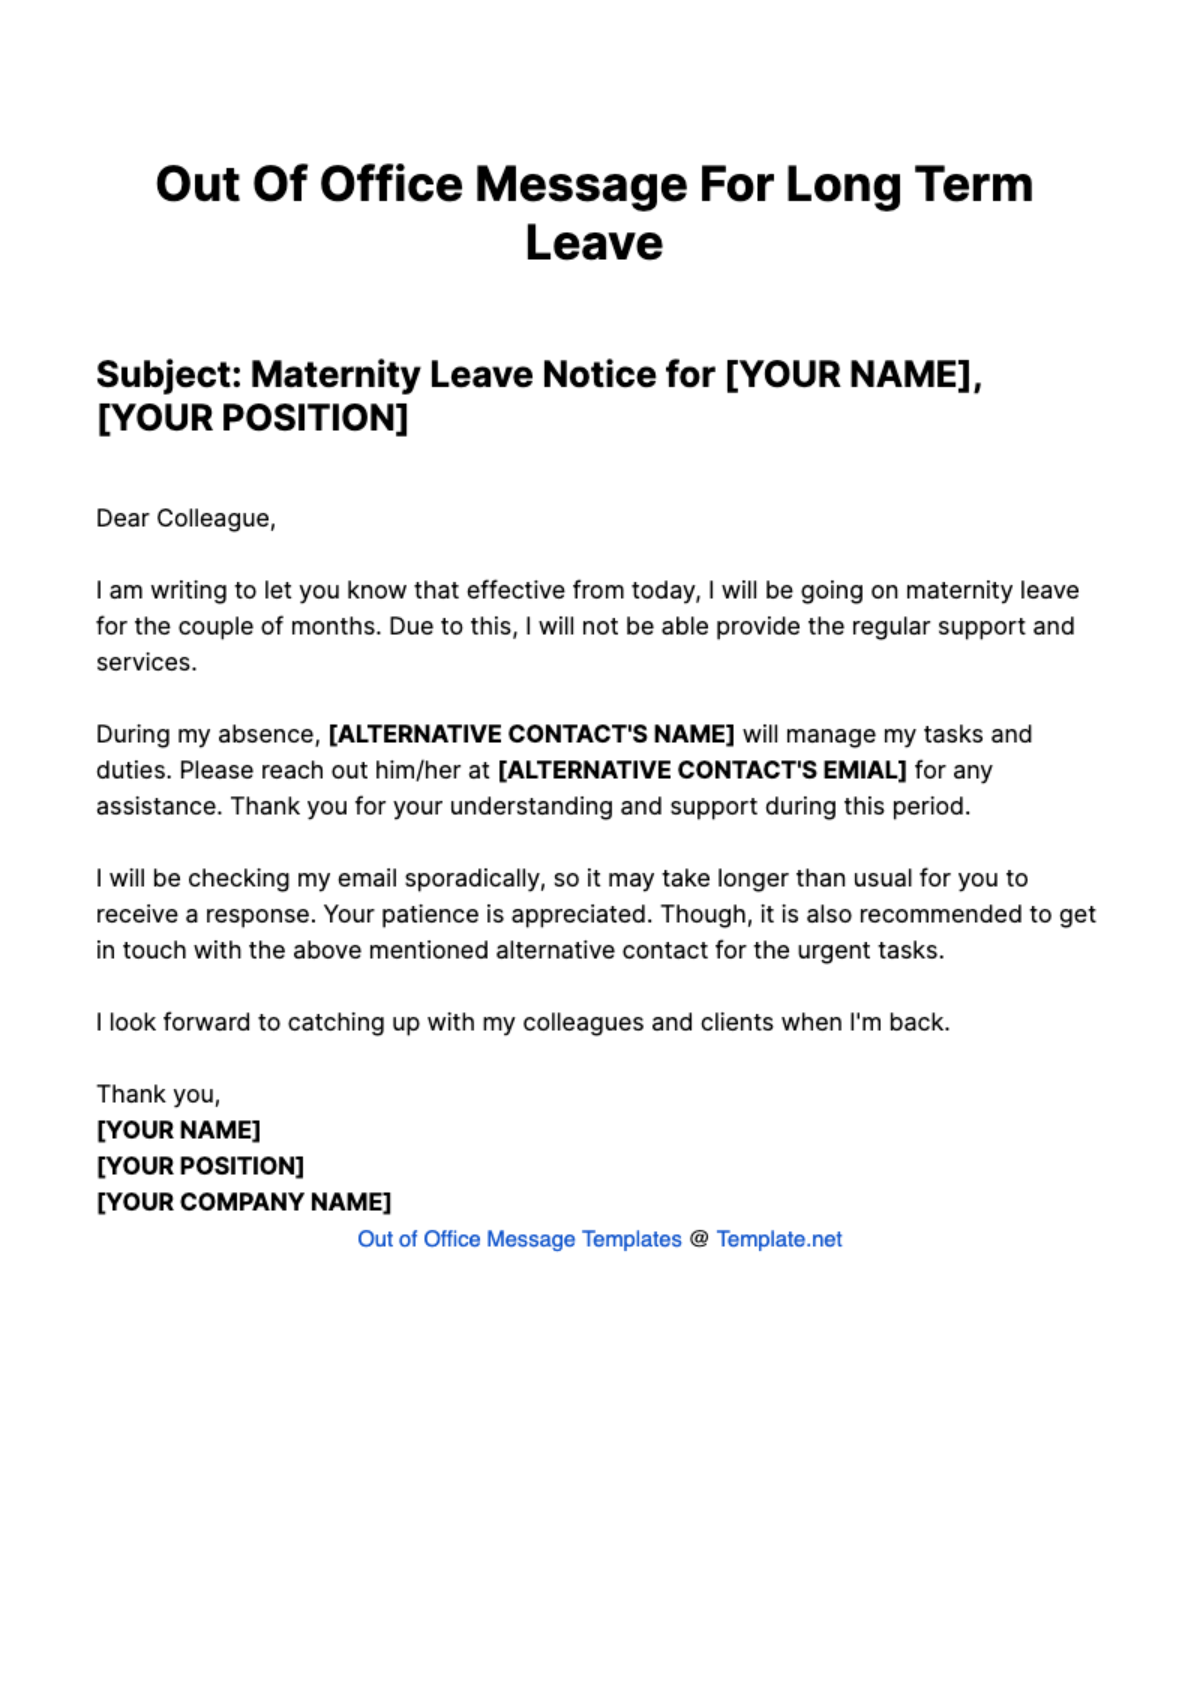 Out Of Office Message For Long Term Leave Template